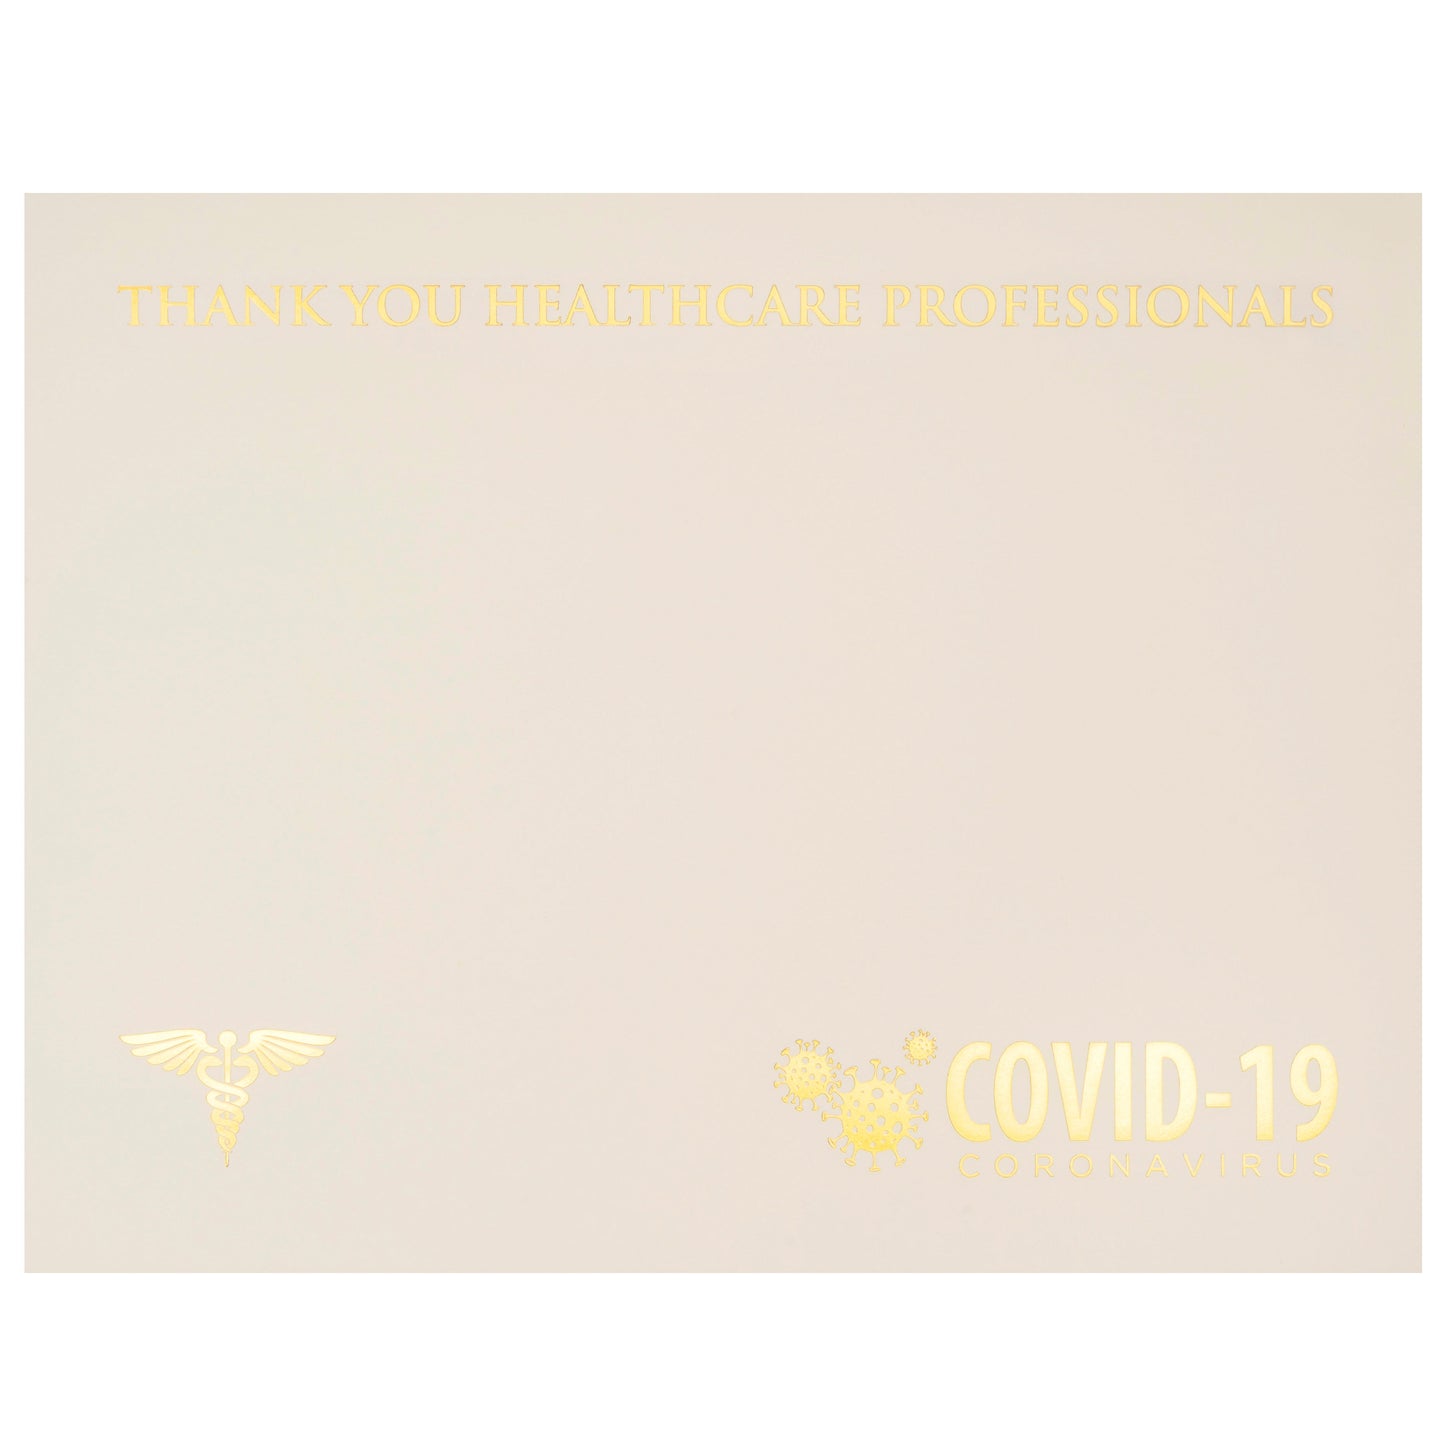 St. James® Premium Weight "Healthcare Professionals" Certificates, Gold Foil, Ivory, 65 lb, 8.5 x 11", Pack of 25